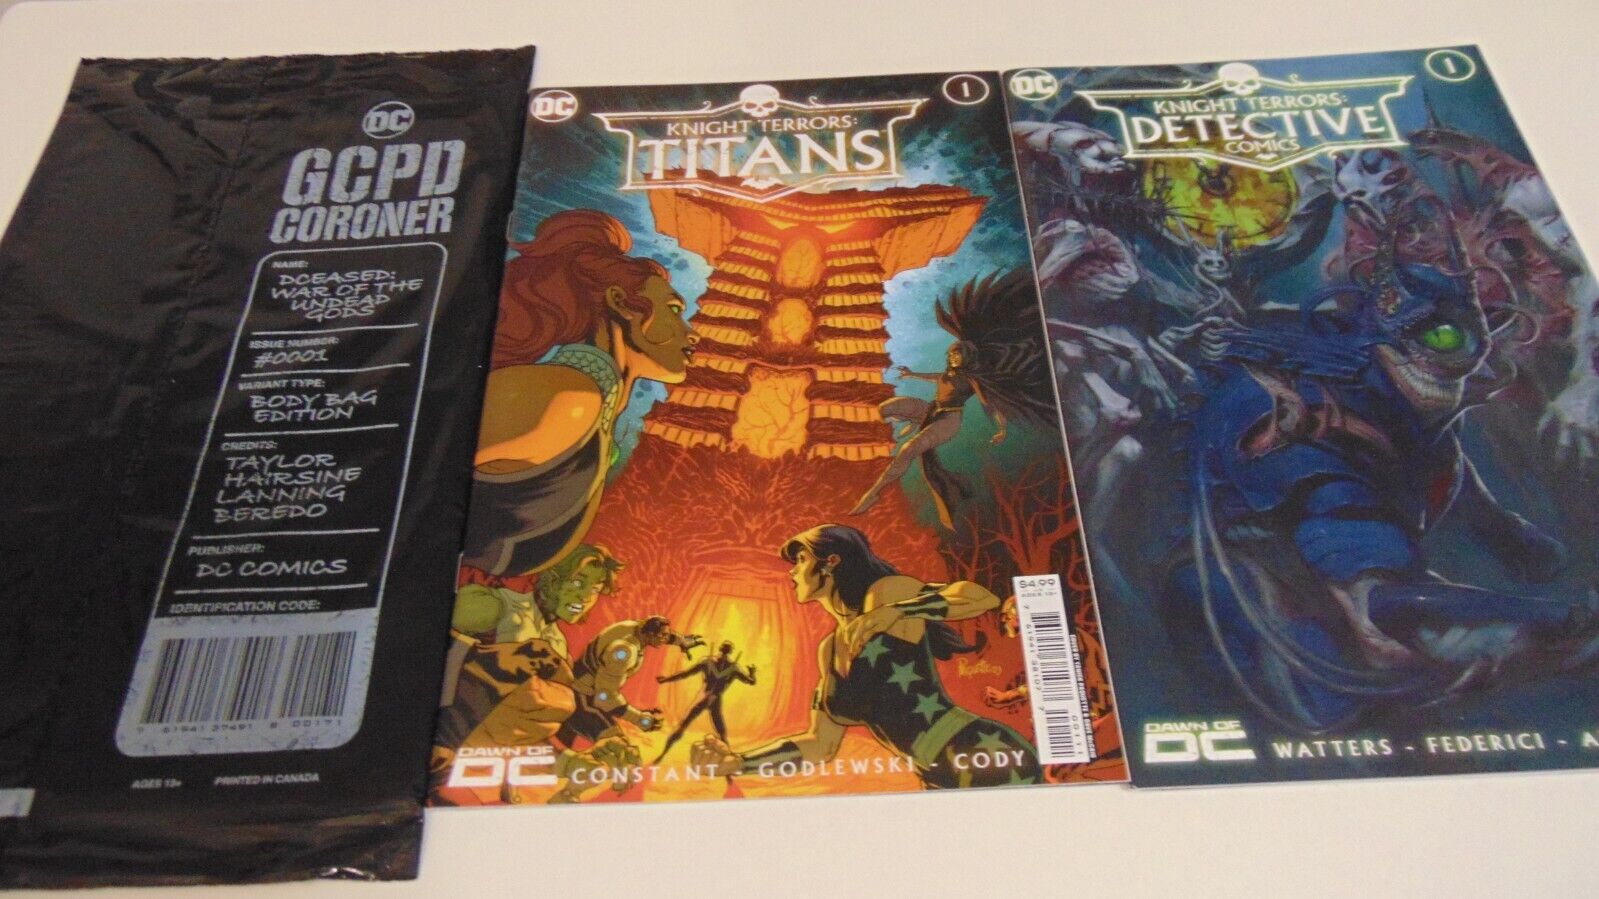 Knight Terrors Detective Comic #1 & TITIANS #1 + GCPD BODYBAG -SEALED LOT OF 3